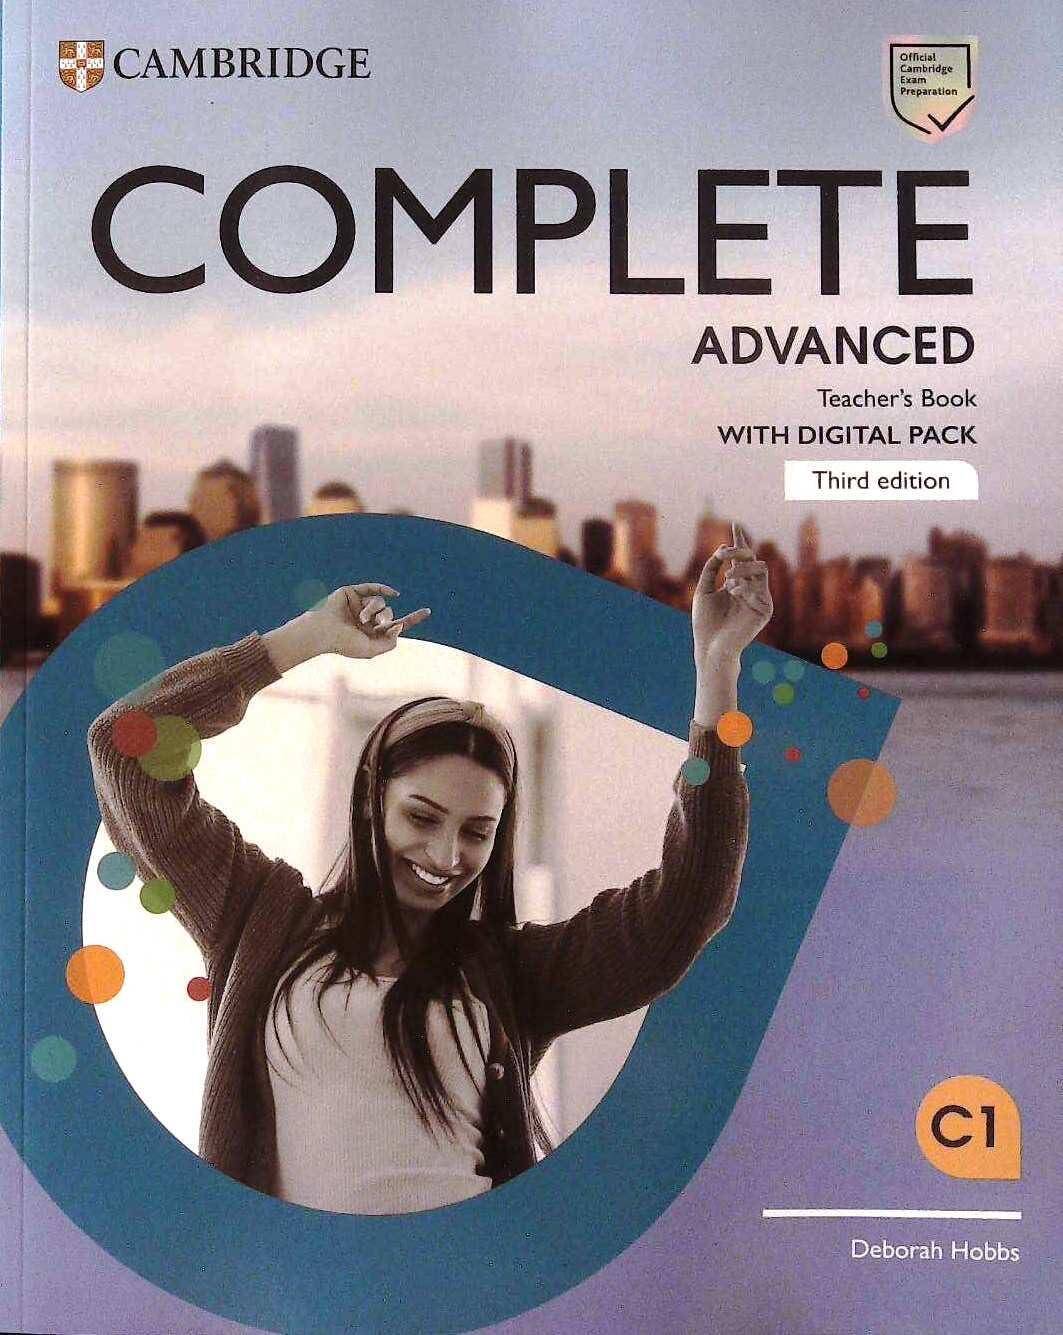 Complete Advanced 3ed. Teacher's Book with Digital Pack